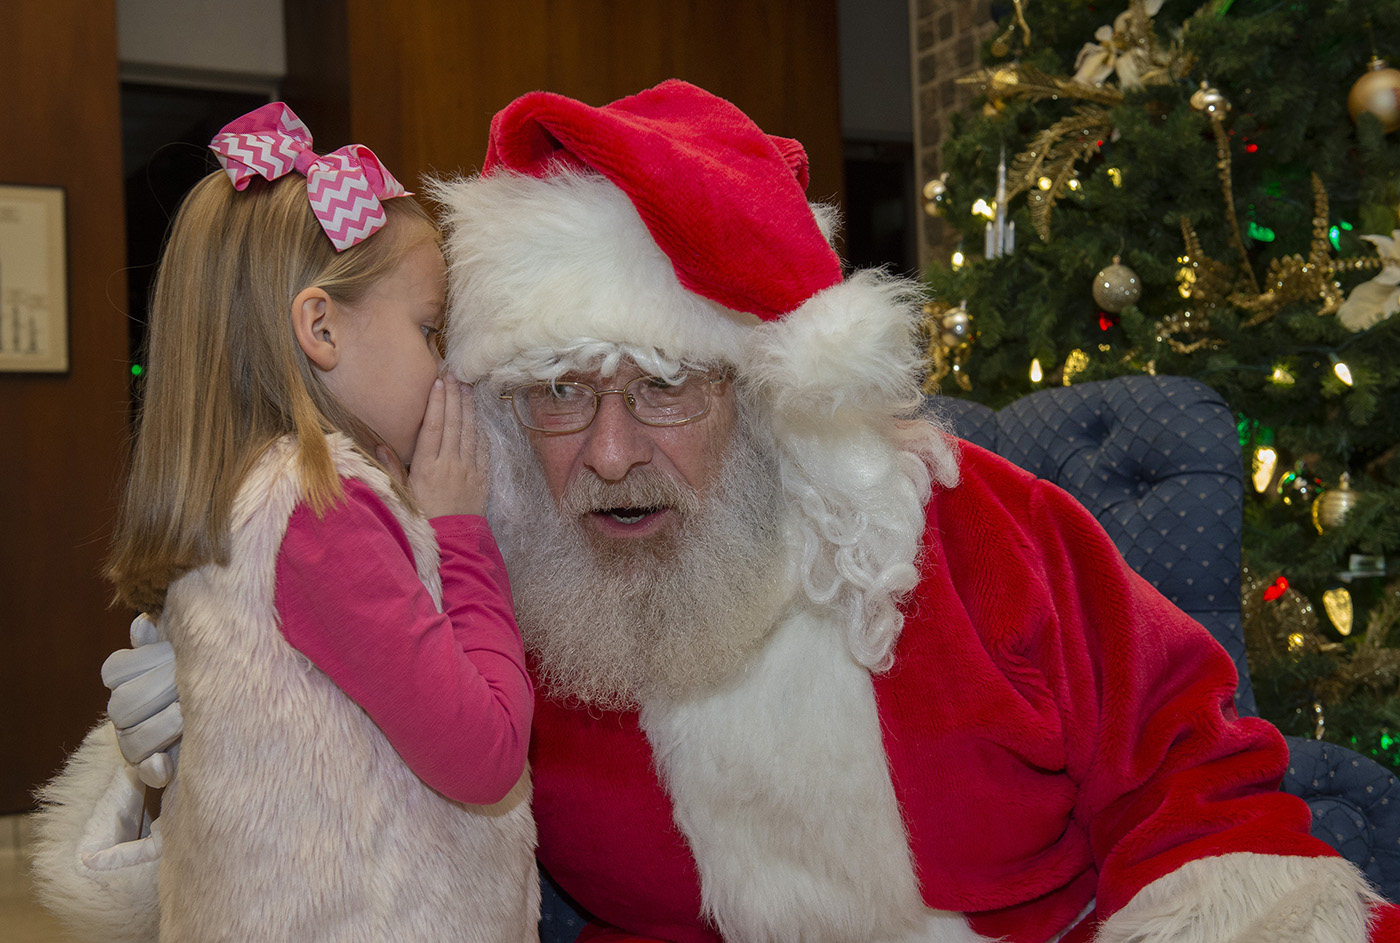 At the Marshall holiday tree lighting Dec. 9, Bentley Deemer bends the ear of Santa Claus.